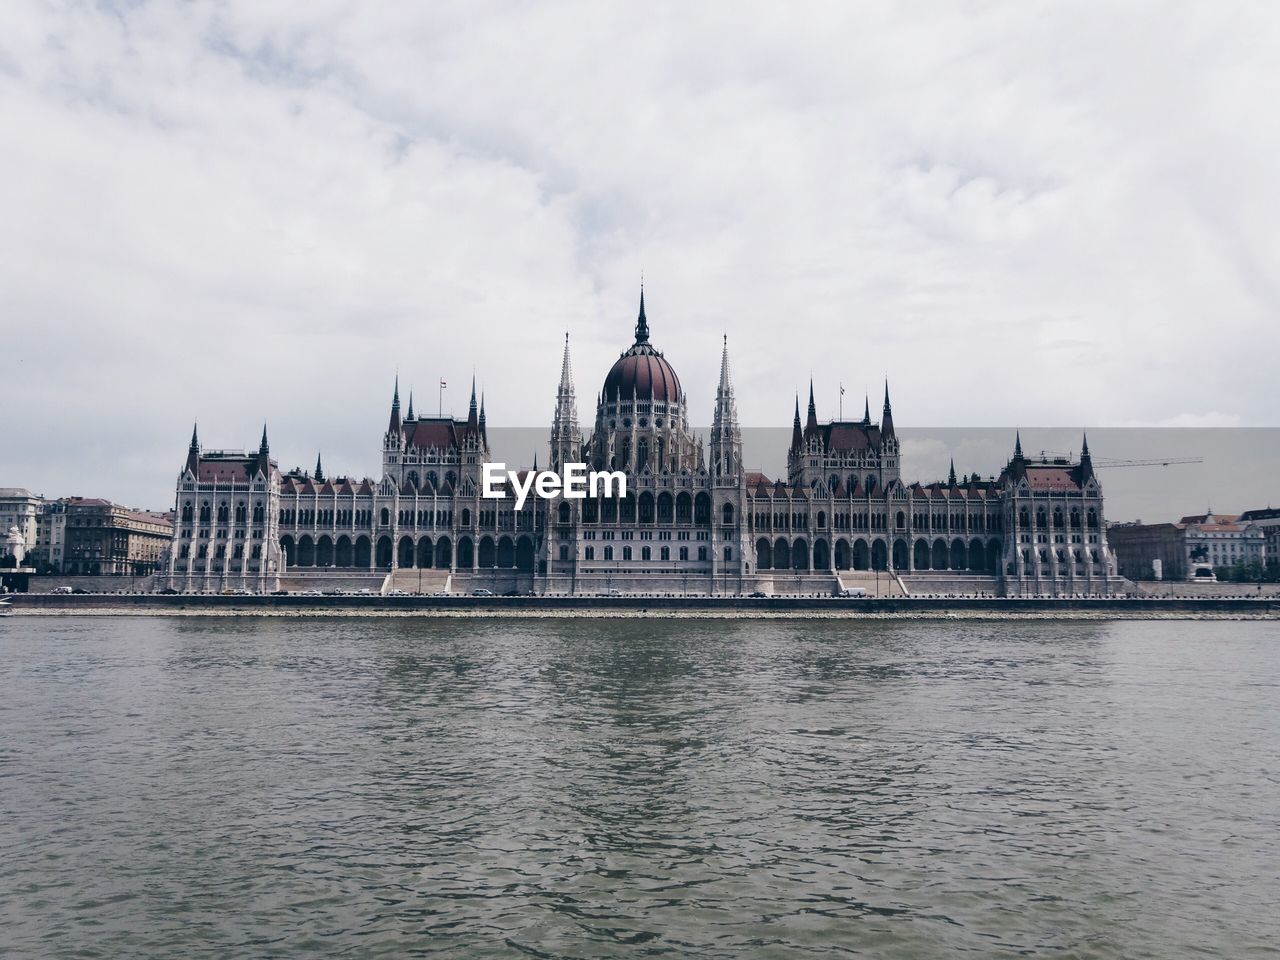 Hungarian parliament building by river against cloudy sky